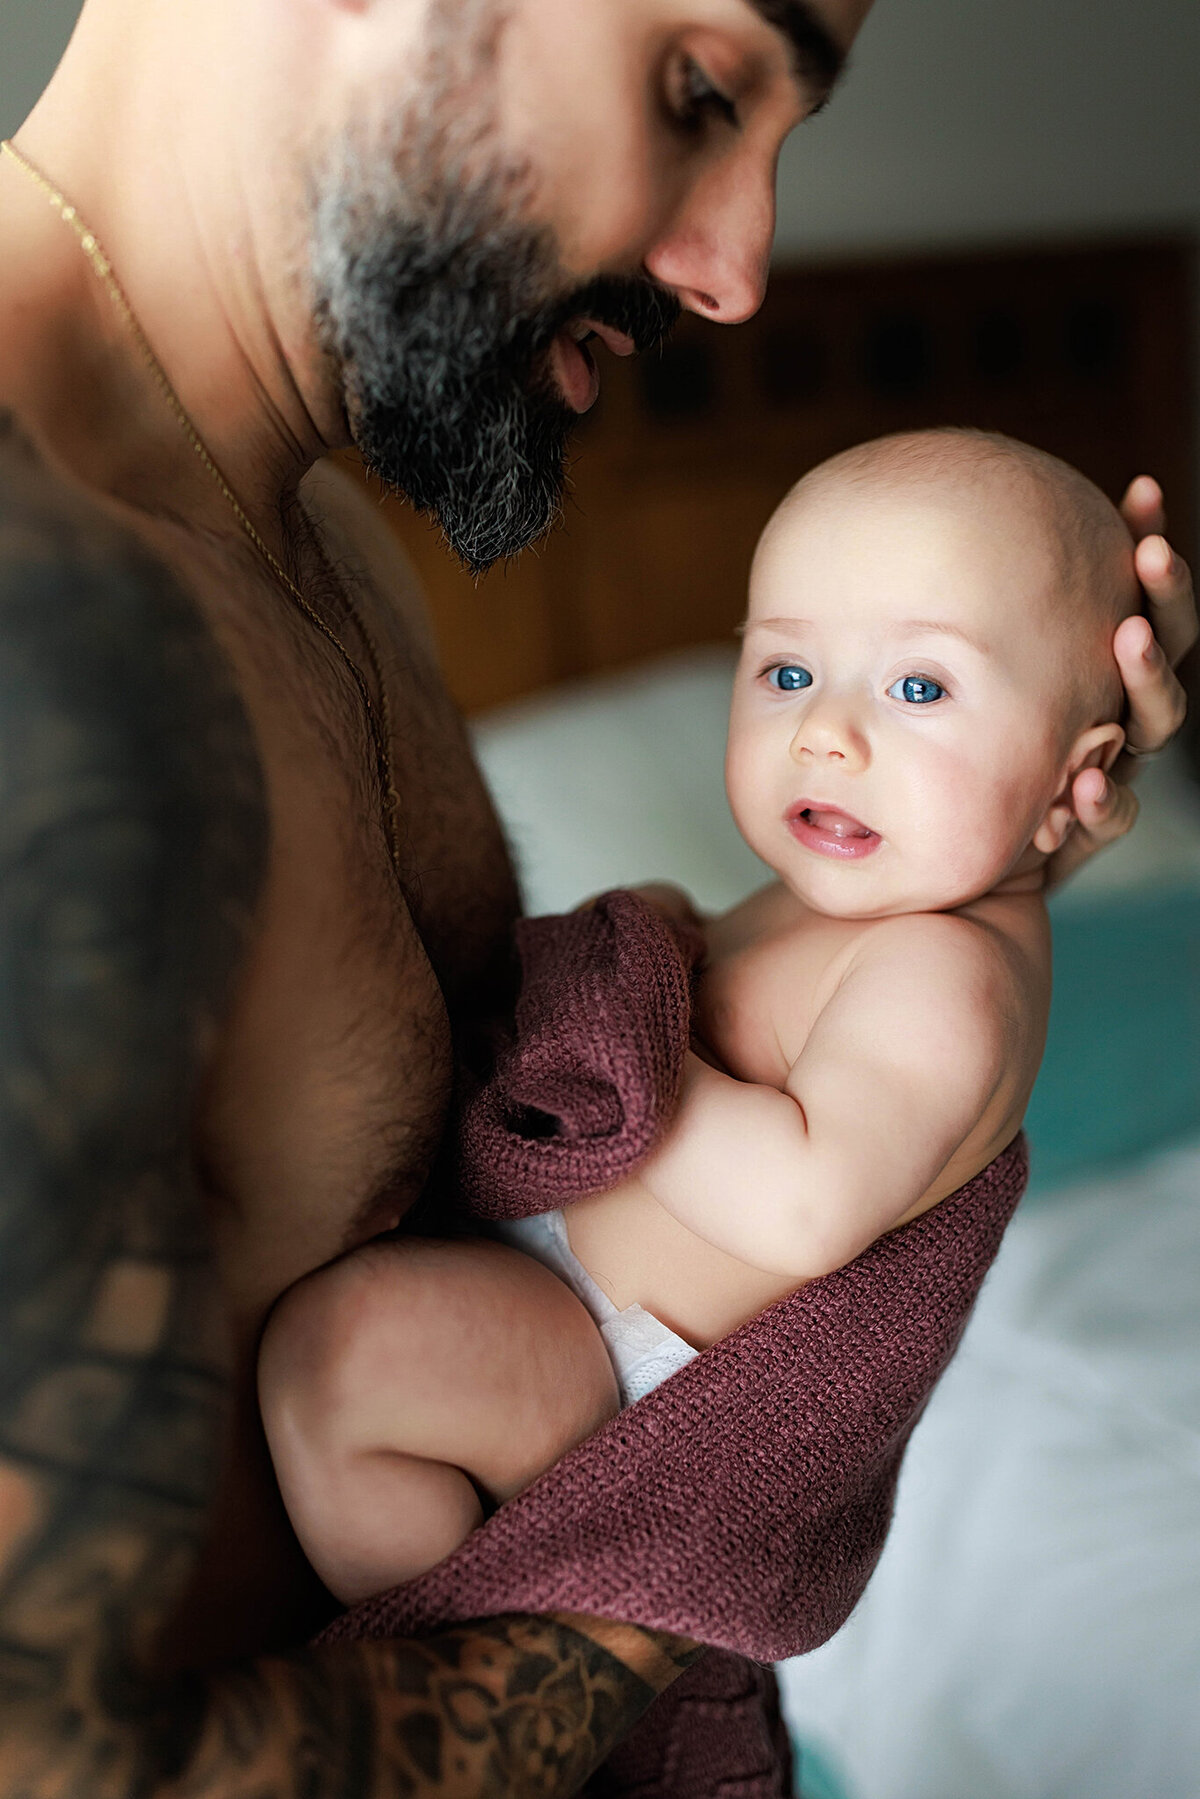 shirtless-dad-and-baby